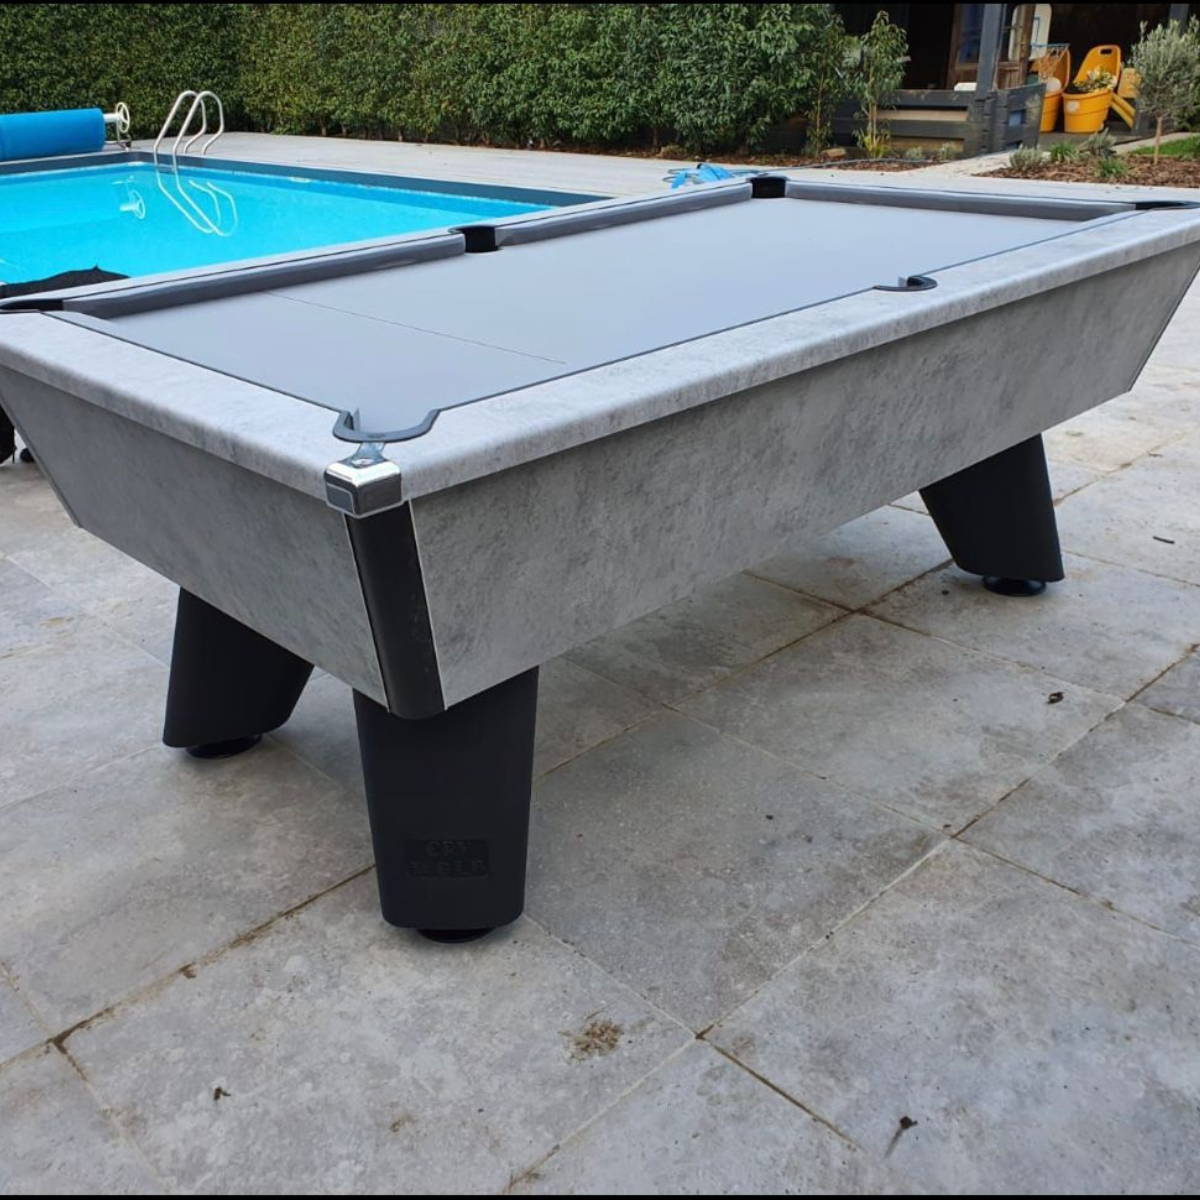 Cry Wolf Slate Bed Outdoor Pool Table - Urban Grey 7